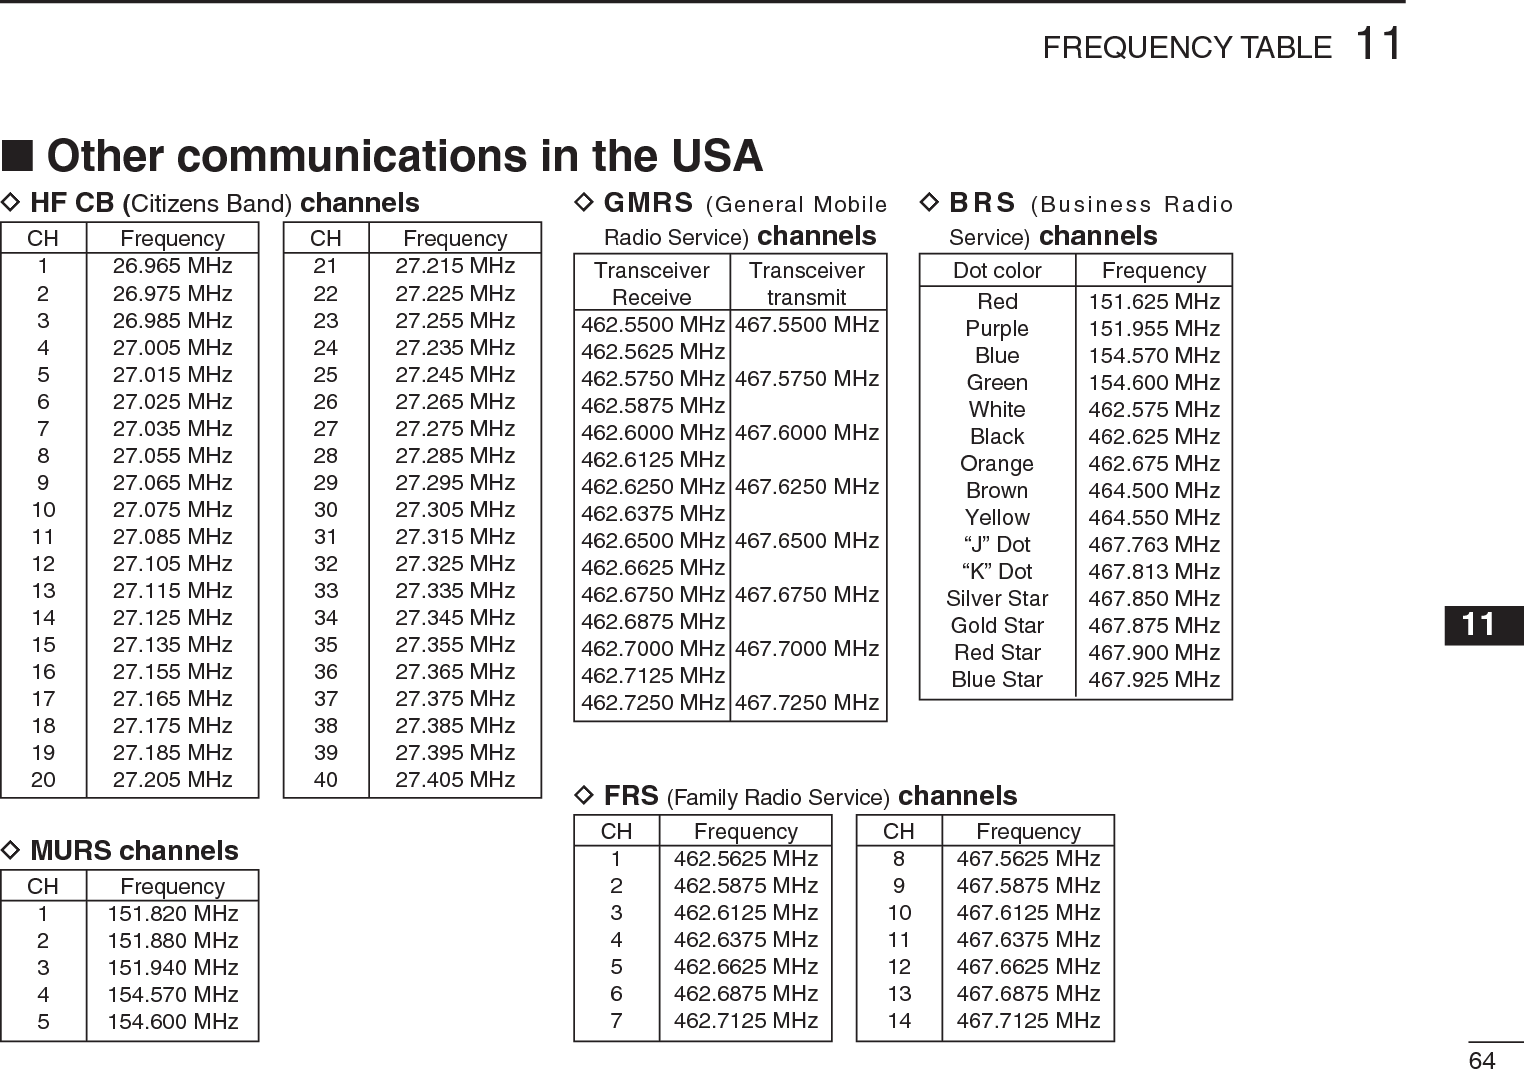 6411FREQUENCY TABLE11N Other communications in the USADot color FrequencyRed 151.625 MHzPurple 151.955 MHzBlue 154.570 MHzGreen 154.600 MHzWhite 462.575 MHzBlack 462.625 MHzOrange 462.675 MHzBrown 464.500 MHzYellow 464.550 MHz“J” Dot 467.763 MHz“K” Dot 467.813 MHzSilver Star 467.850 MHzGold Star 467.875 MHzRed Star 467.900 MHzBlue Star 467.925 MHzDBRS (Business Radio Service) channelsTransceiver TransceiverReceive transmit462.5500 MHz 467.5500 MHz462.5625 MHz462.5750 MHz 467.5750 MHz462.5875 MHz462.6000 MHz 467.6000 MHz462.6125 MHz462.6250 MHz 467.6250 MHz462.6375 MHz462.6500 MHz 467.6500 MHz462.6625 MHz462.6750 MHz 467.6750 MHz462.6875 MHz462.7000 MHz 467.7000 MHz462.7125 MHz462.7250 MHz 467.7250 MHzDGMRS (General Mobile Radio Service) channelsCH Frequency1 151.820 MHz2 151.880 MHz3 151.940 MHz4 154.570 MHz5 154.600 MHzDMURS channelsCH Frequency1 26.965 MHz2 26.975 MHz3 26.985 MHz4 27.005 MHz5 27.015 MHz6 27.025 MHz7 27.035 MHz8 27.055 MHz9 27.065 MHz10 27.075 MHz11 27.085 MHz12 27.105 MHz13 27.115 MHz14 27.125 MHz15 27.135 MHz16 27.155 MHz17 27.165 MHz18 27.175 MHz19 27.185 MHz20 27.205 MHzD HF CB (Citizens Band) channelsCH Frequency21 27.215 MHz22 27.225 MHz23 27.255 MHz24 27.235 MHz25 27.245 MHz26 27.265 MHz27 27.275 MHz28 27.285 MHz29 27.295 MHz30 27.305 MHz31 27.315 MHz32 27.325 MHz33 27.335 MHz34 27.345 MHz35 27.355 MHz36 27.365 MHz37 27.375 MHz38 27.385 MHz39 27.395 MHz40 27.405 MHzCH Frequency1 462.5625 MHz2 462.5875 MHz3 462.6125 MHz4 462.6375 MHz5 462.6625 MHz6 462.6875 MHz7 462.7125 MHzDFRS (Family Radio Service) channelsCH Frequency8 467.5625 MHz9 467.5875 MHz10 467.6125 MHz11 467.6375 MHz12 467.6625 MHz13 467.6875 MHz14 467.7125 MHz